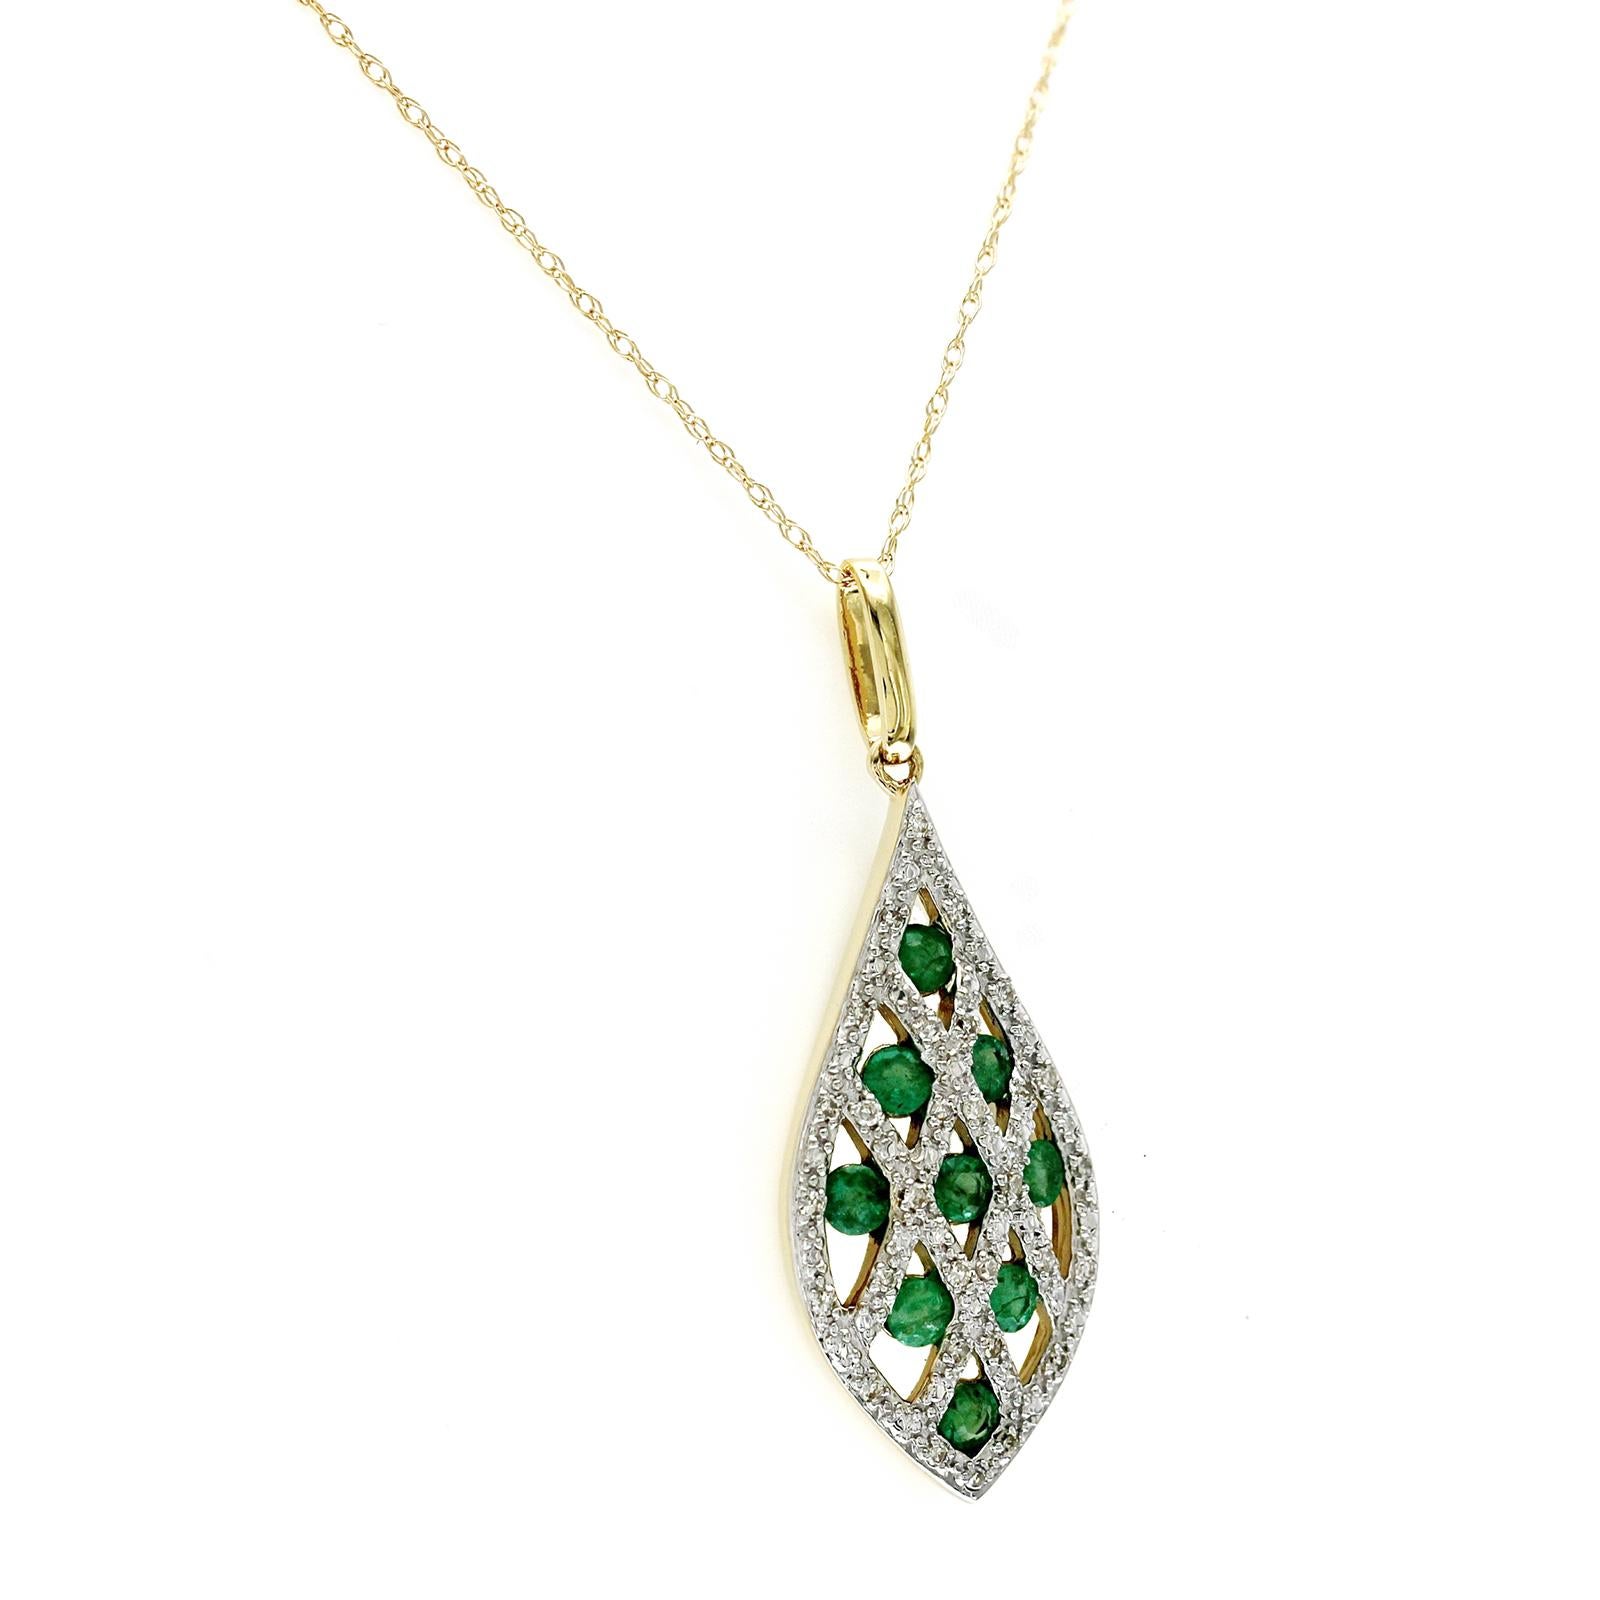 100% Authentic, 100% Customer Satisfaction

Pendant: 33 mm

Chain: 0.03 mm

Size:18 Inches

Metal: 14K Yellow Gold

Hallmarks: 14K

Total Weight: 2.4 Grams

Stone Type: 0.63 CT Natural Emerald &  Diamond 0.12 CT  G   SI1

Condition: New With Tag